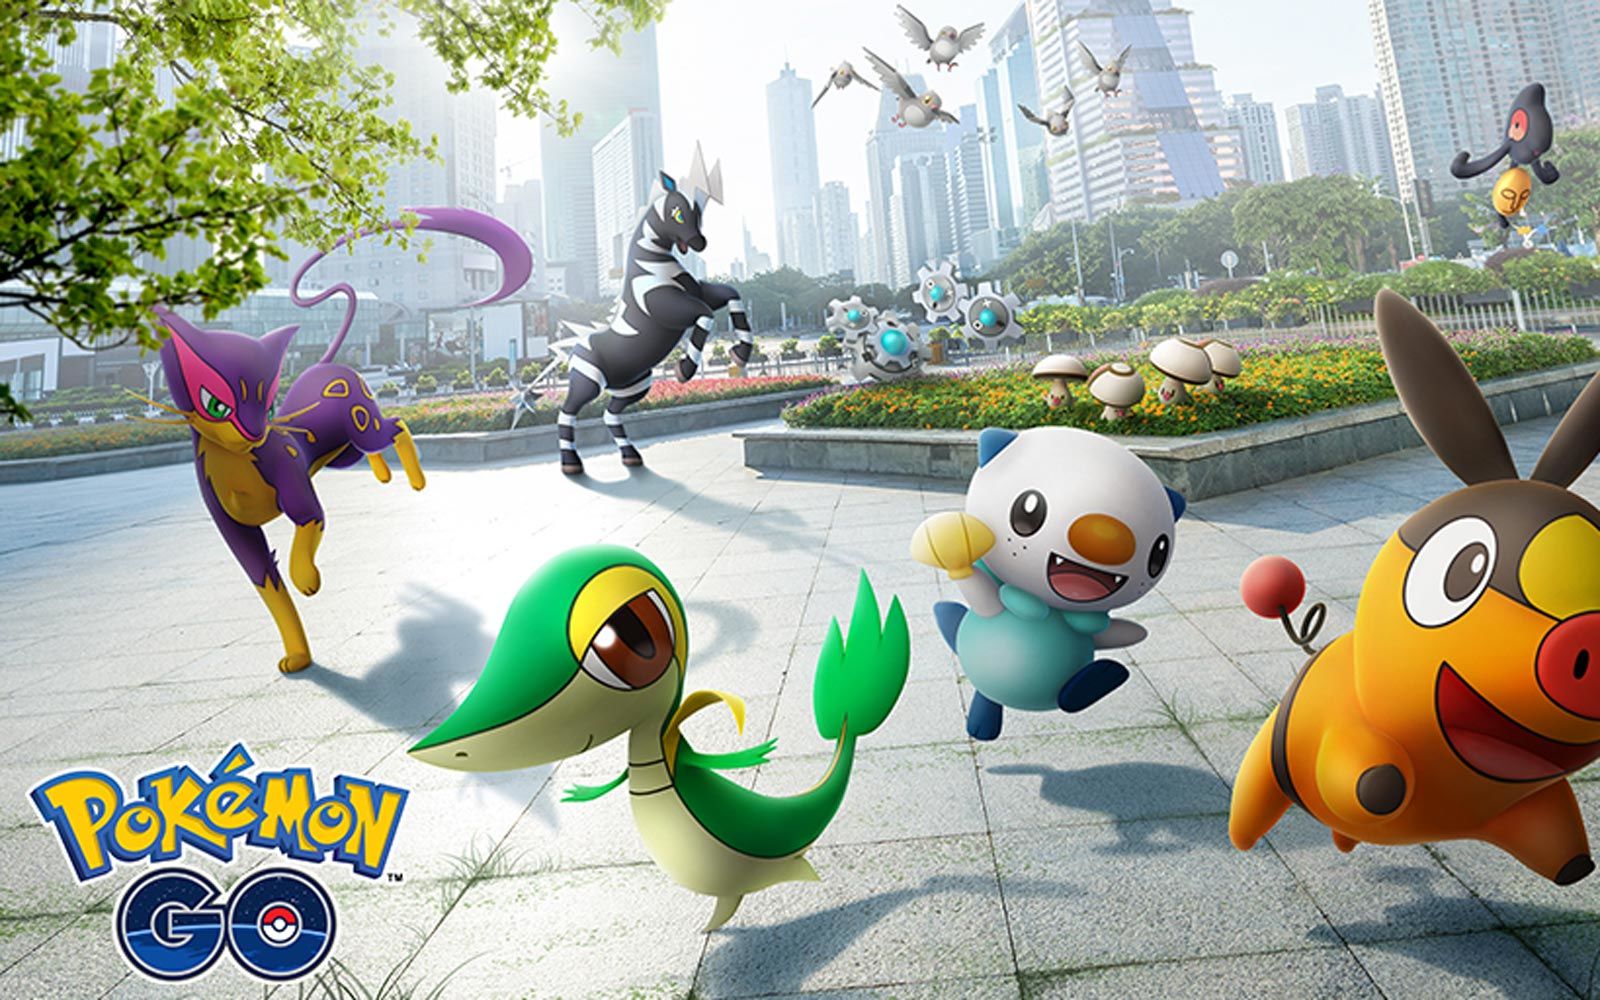 Pokemon GO: Learn How to Get More Coins